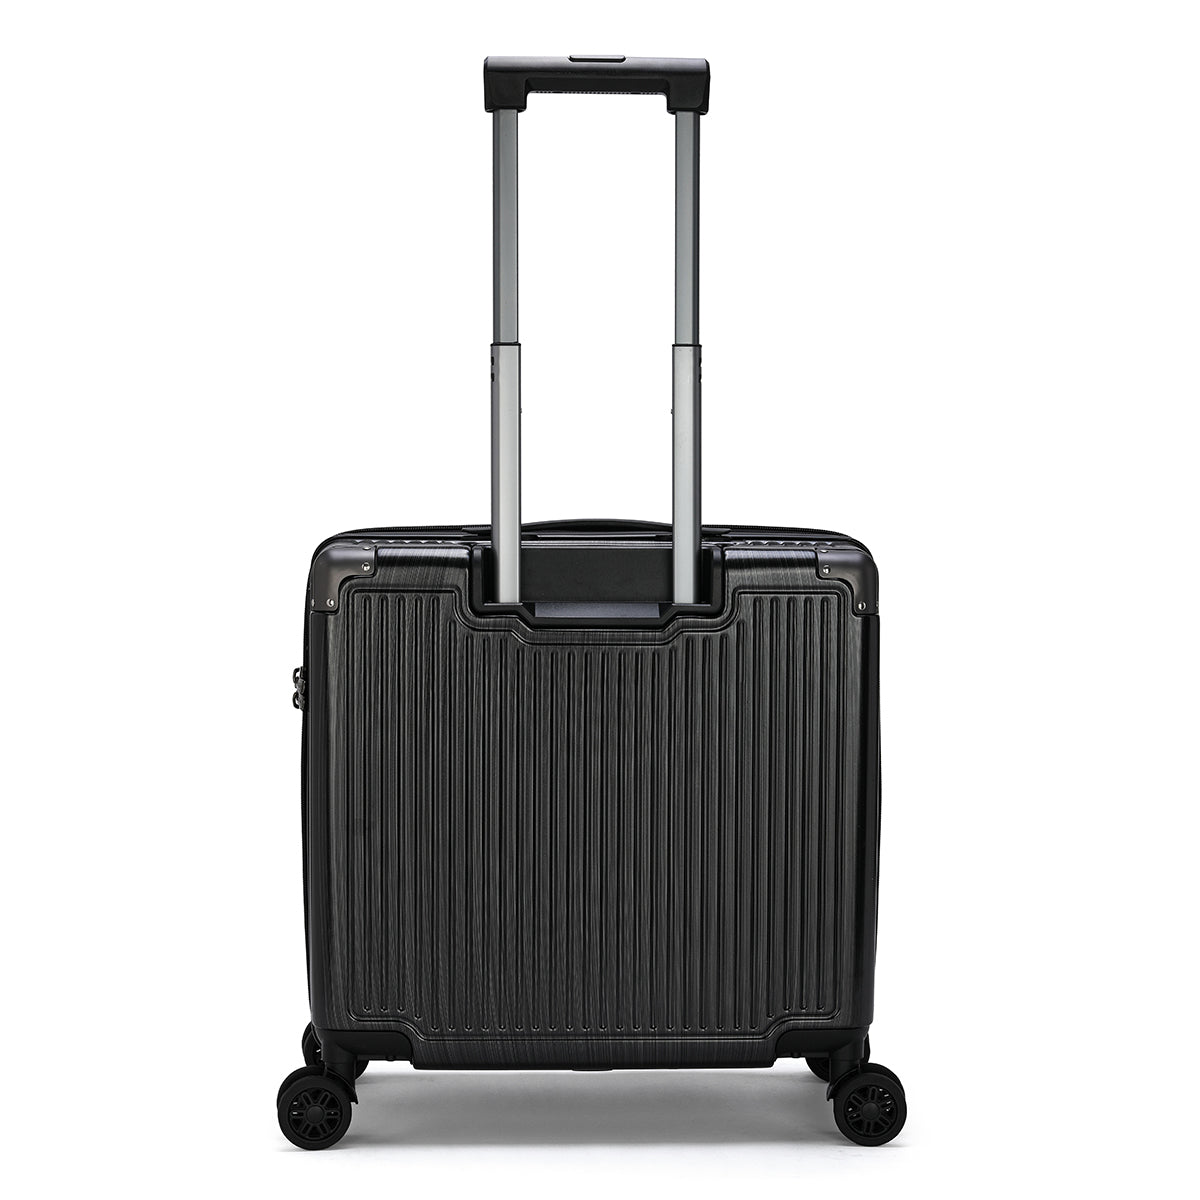 Polycarbonate travel bag, high durability, dark gray color, several sizes